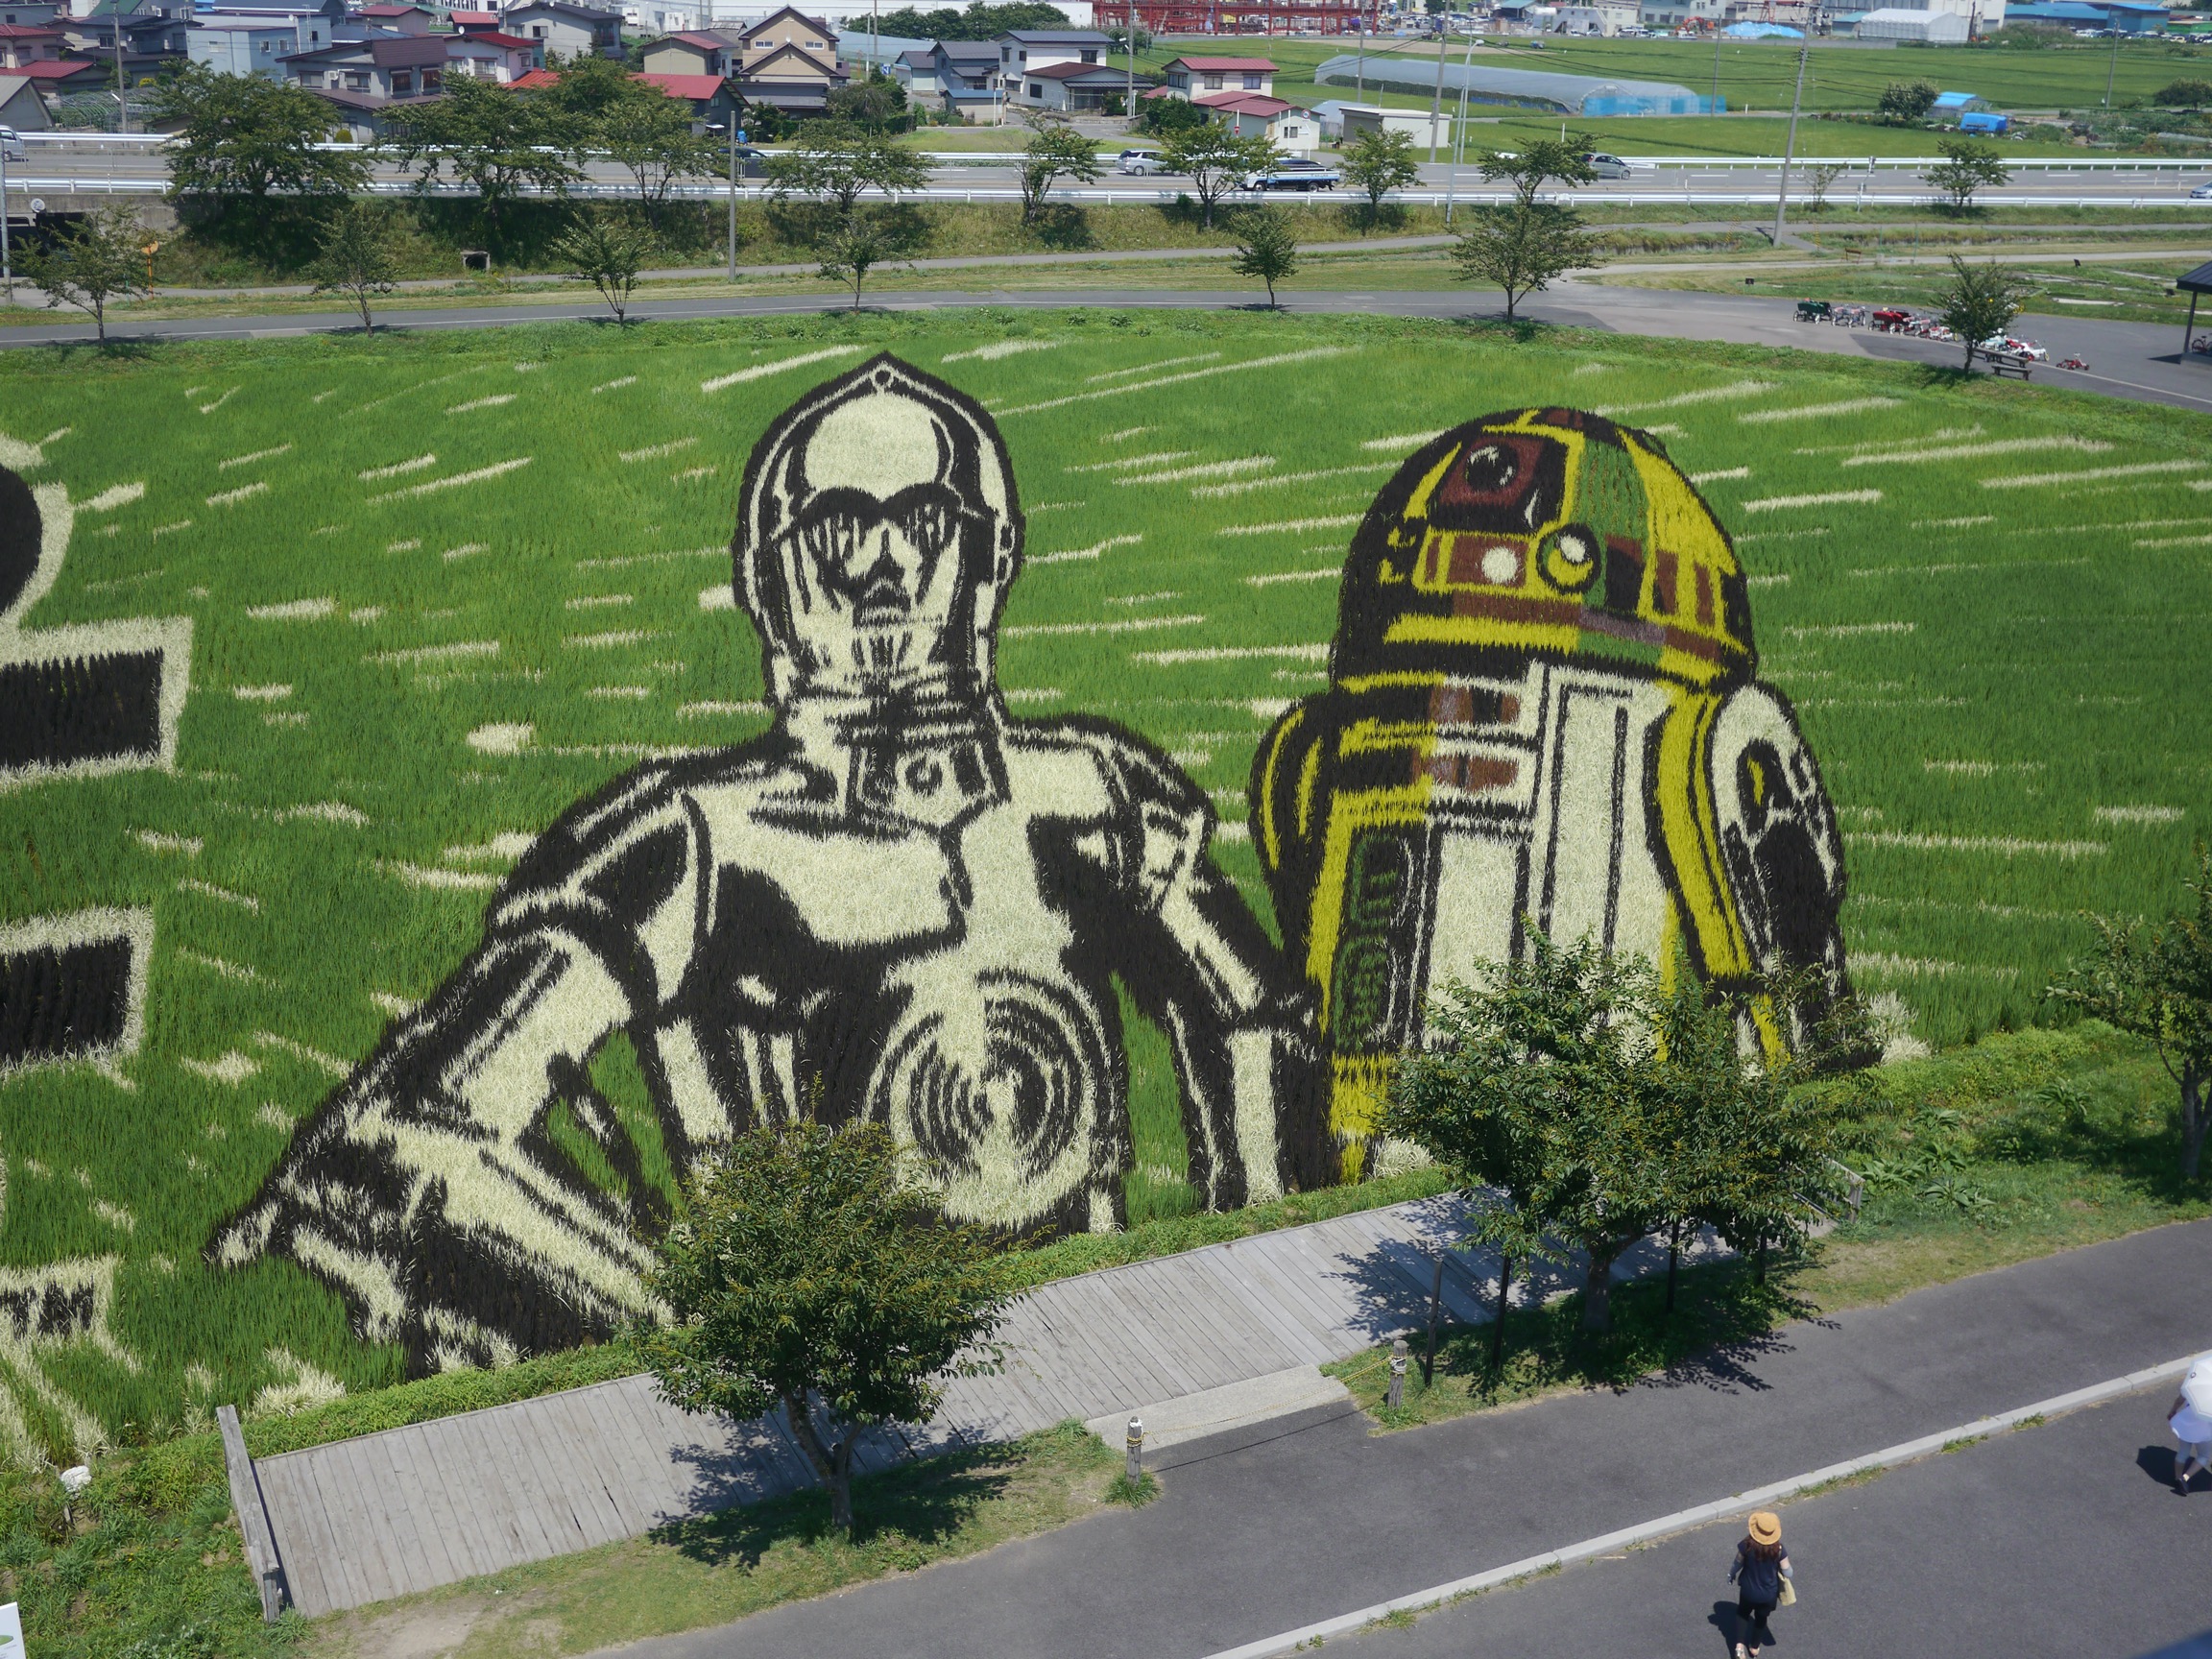 Inakadate Rice Paddy Art 2015: Star Wars & Gone With The Wind